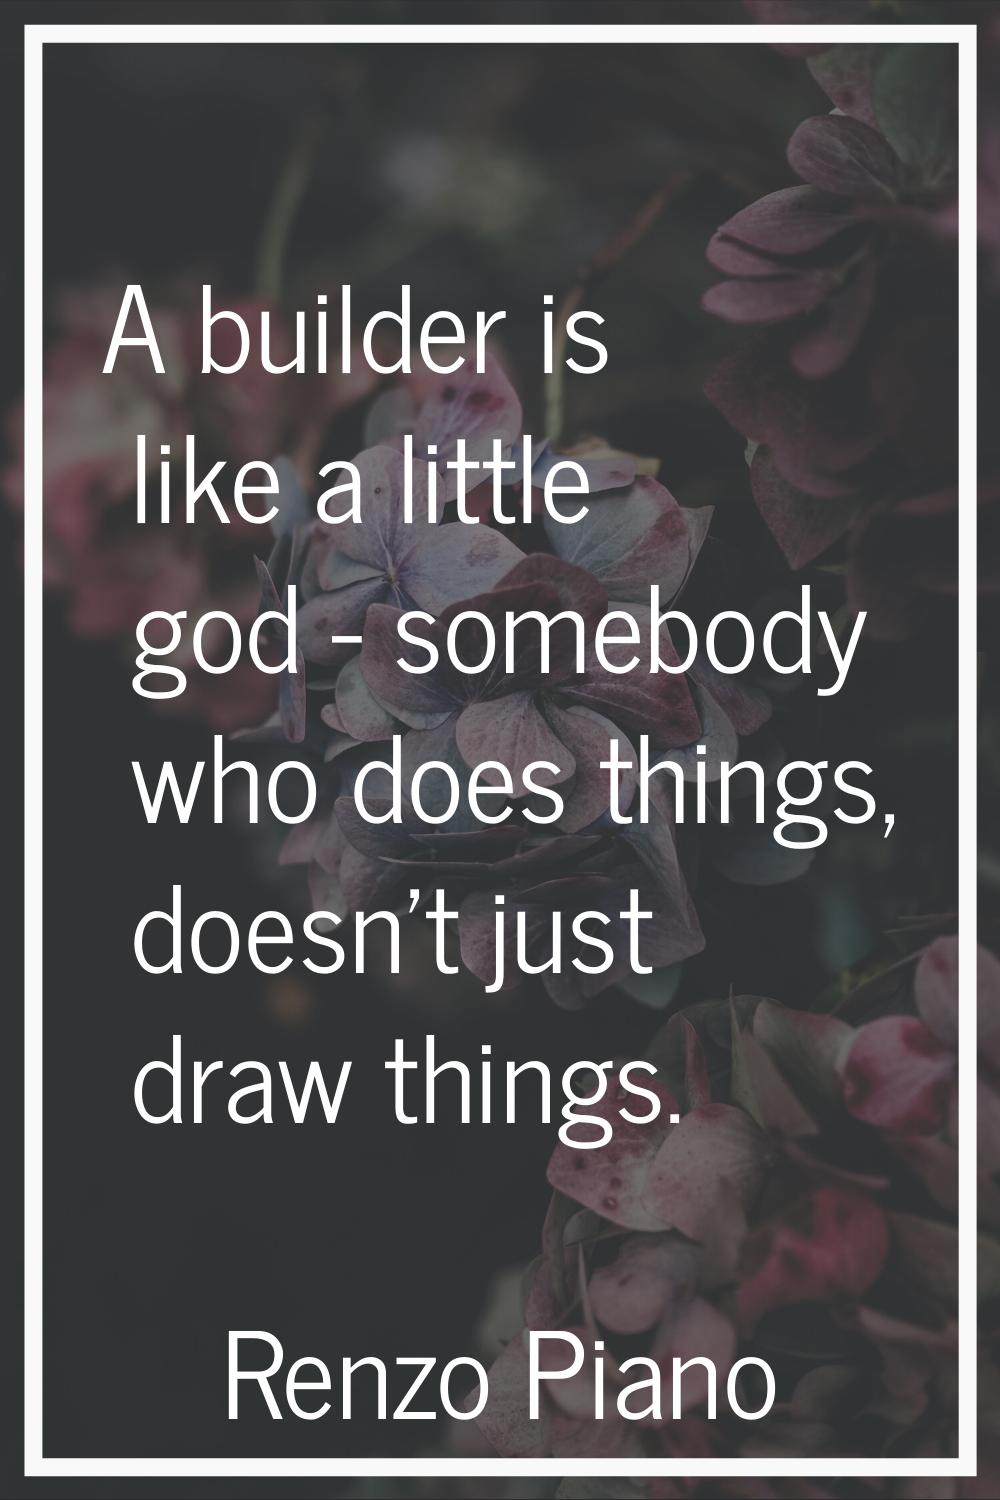 A builder is like a little god - somebody who does things, doesn't just draw things.